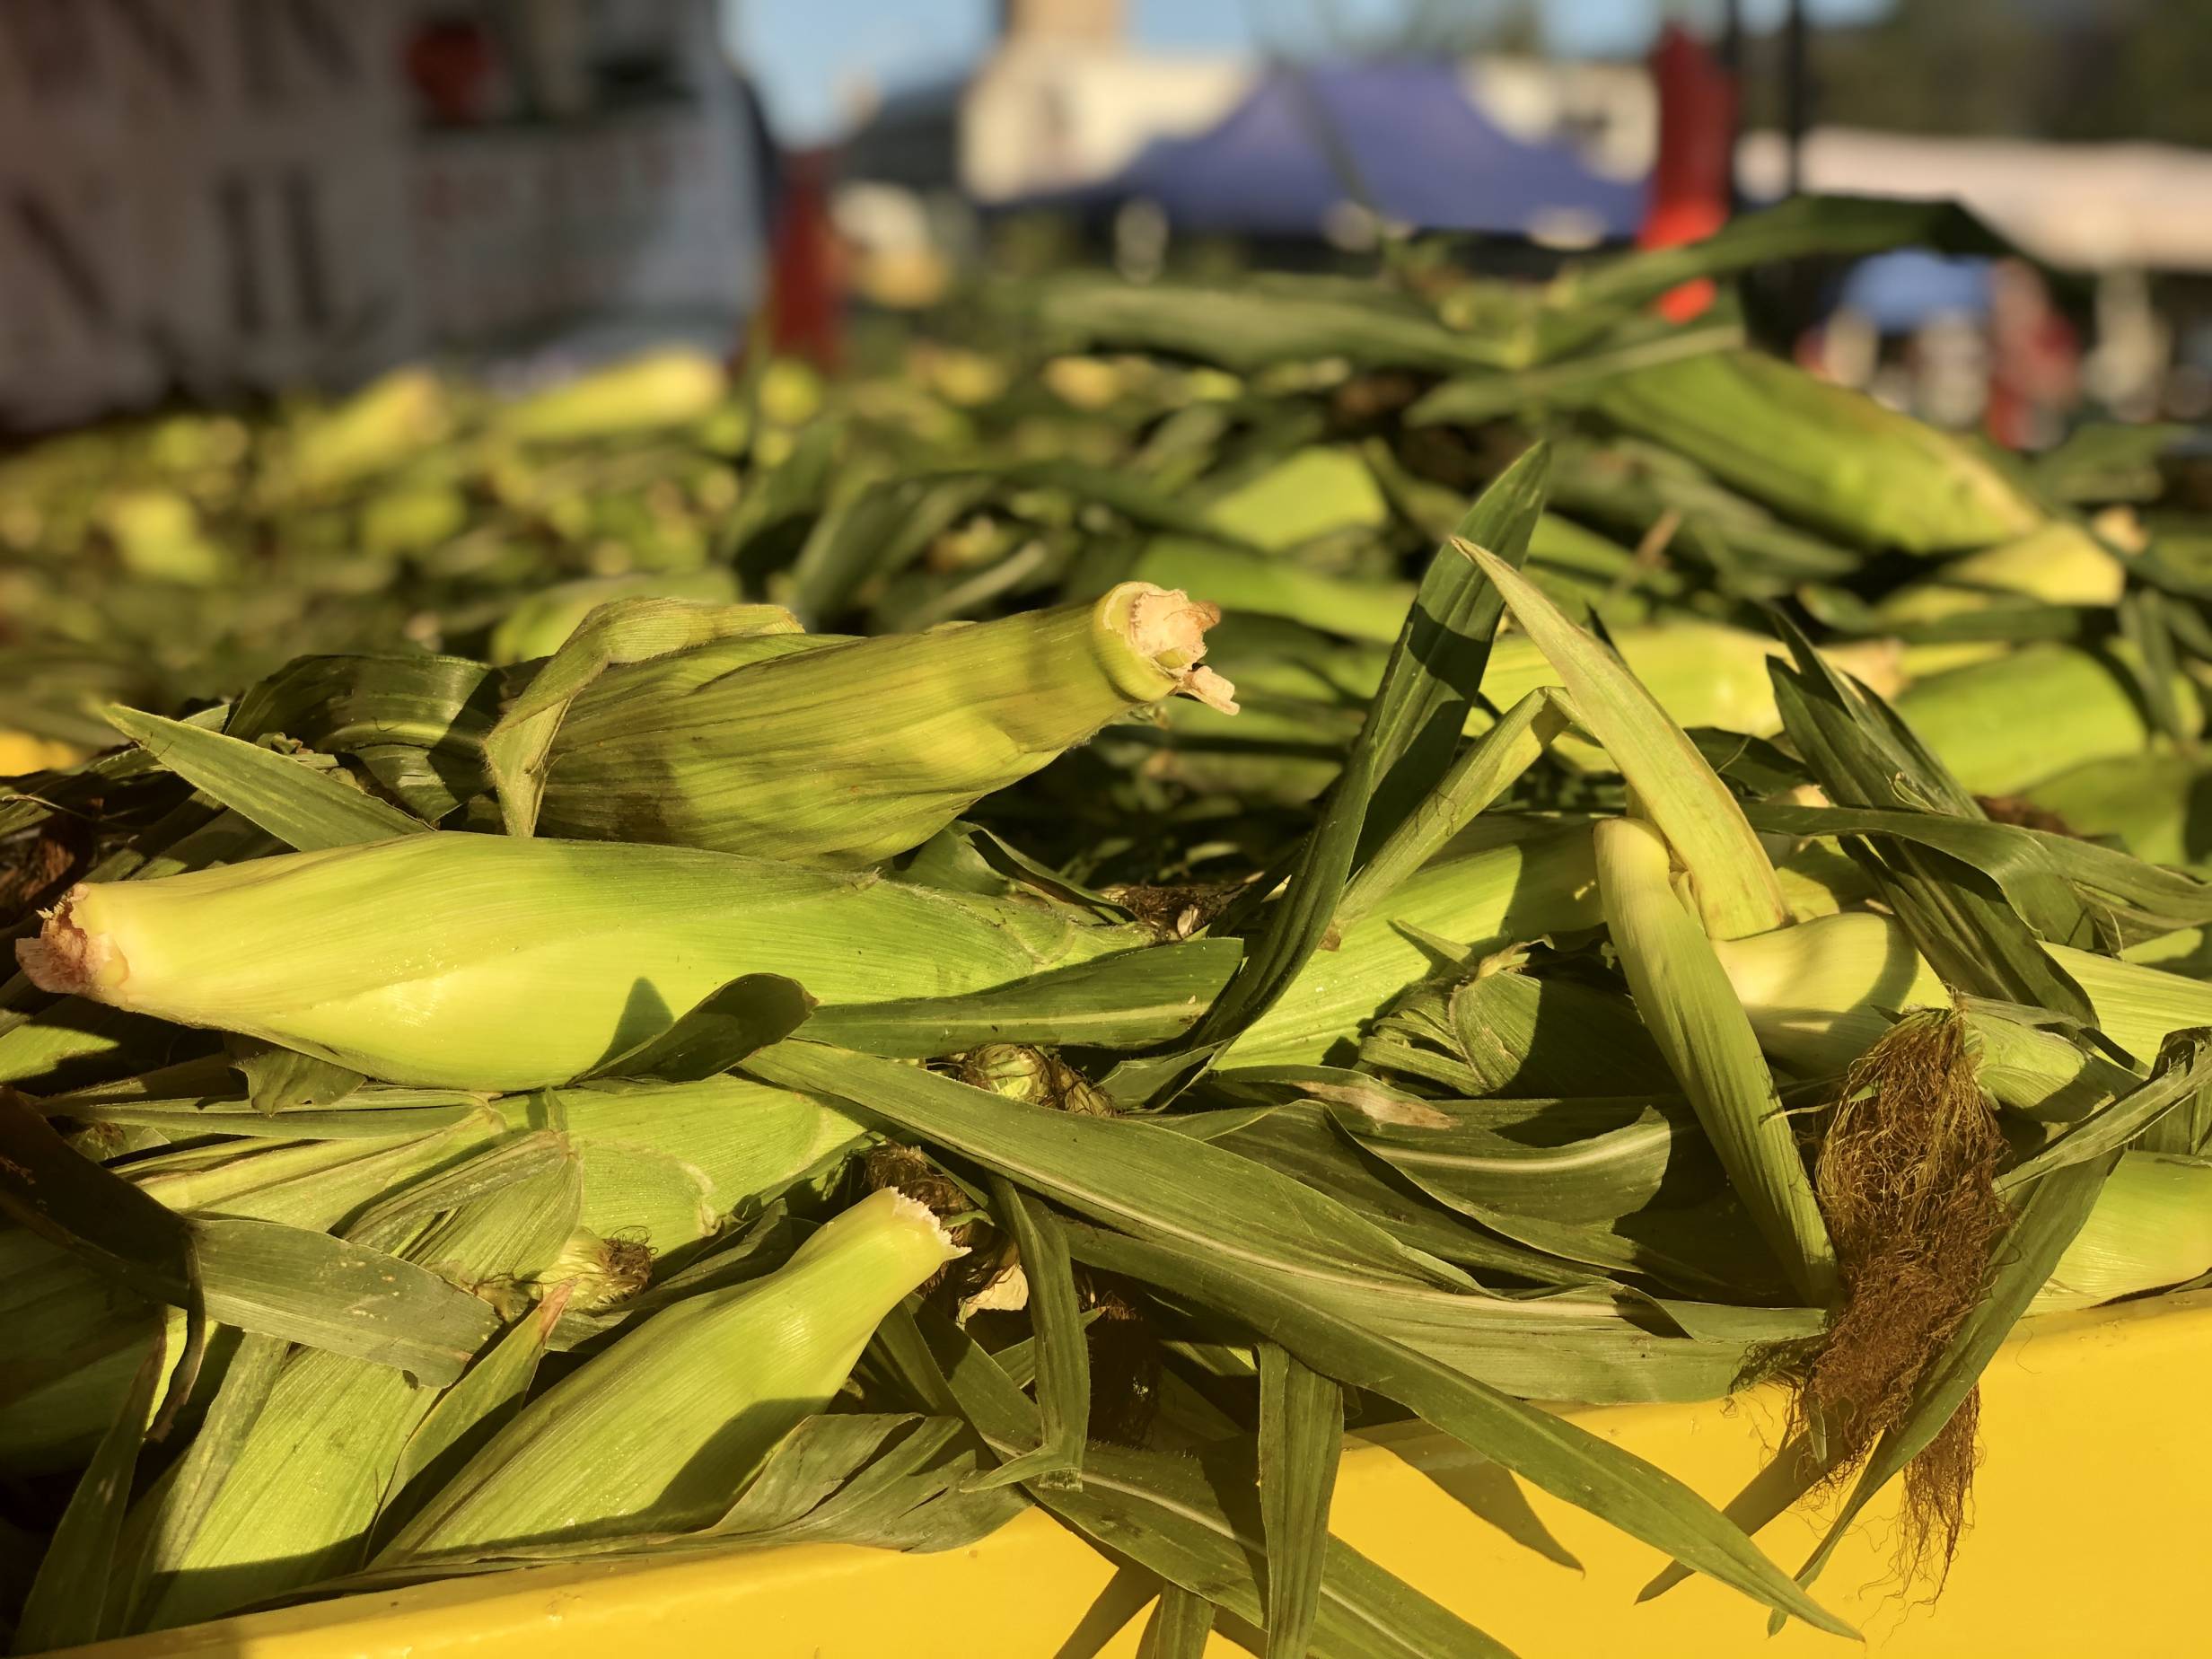 In a bright yellow truckbed, there are hundreds of ears of corn with light green outside and yellow hairs at the top. Photo by Alyssa Buckley.